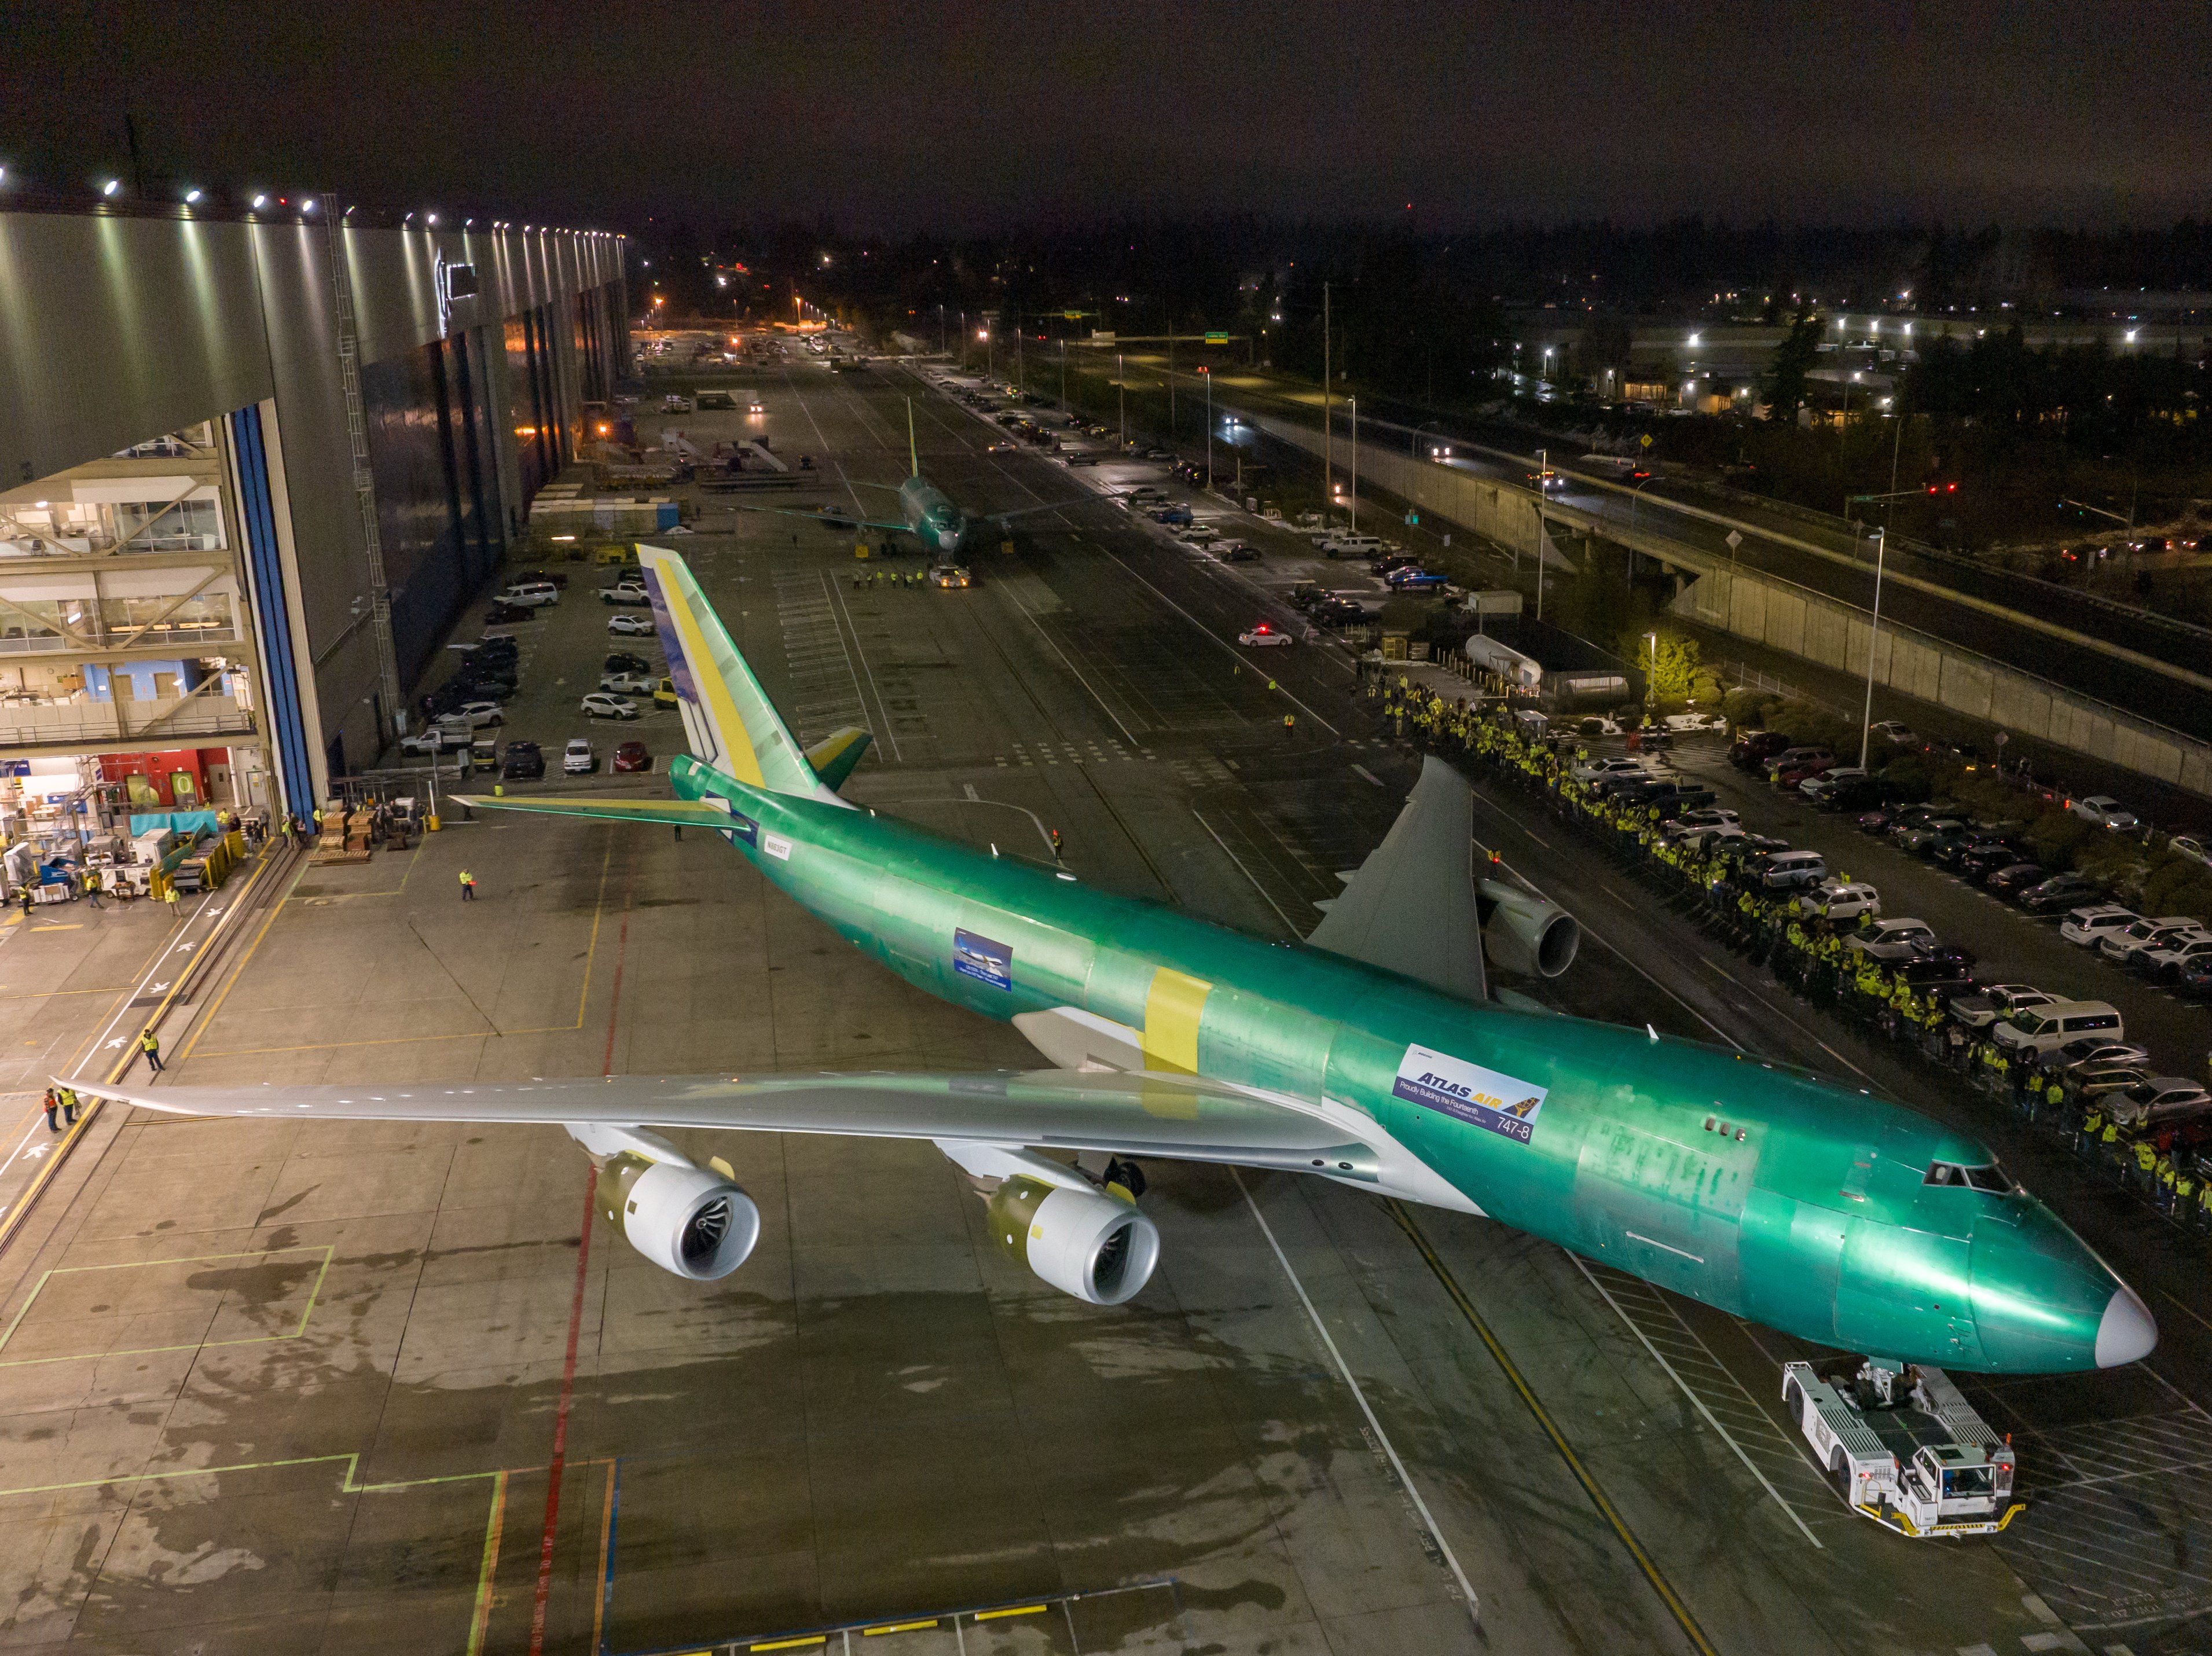 The last (1574th) copy of the legendary Boeing 747 is being assembled